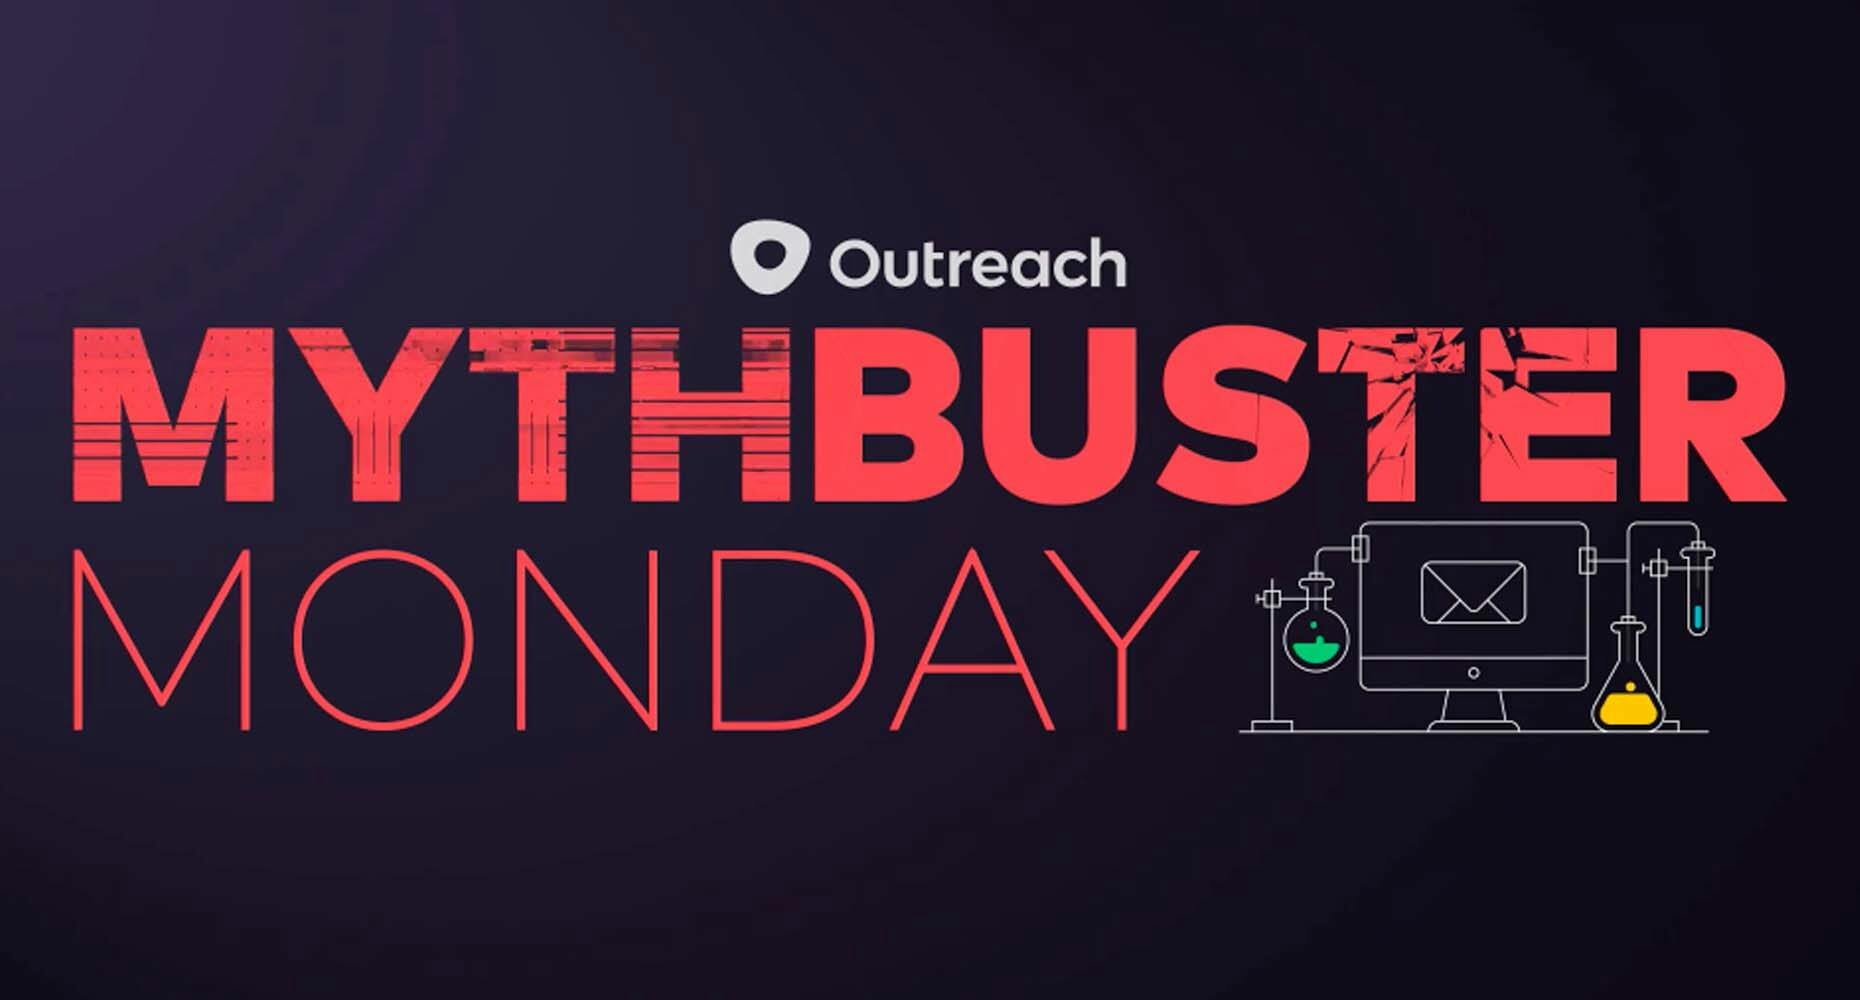 Mythbuster monday logo and graphic